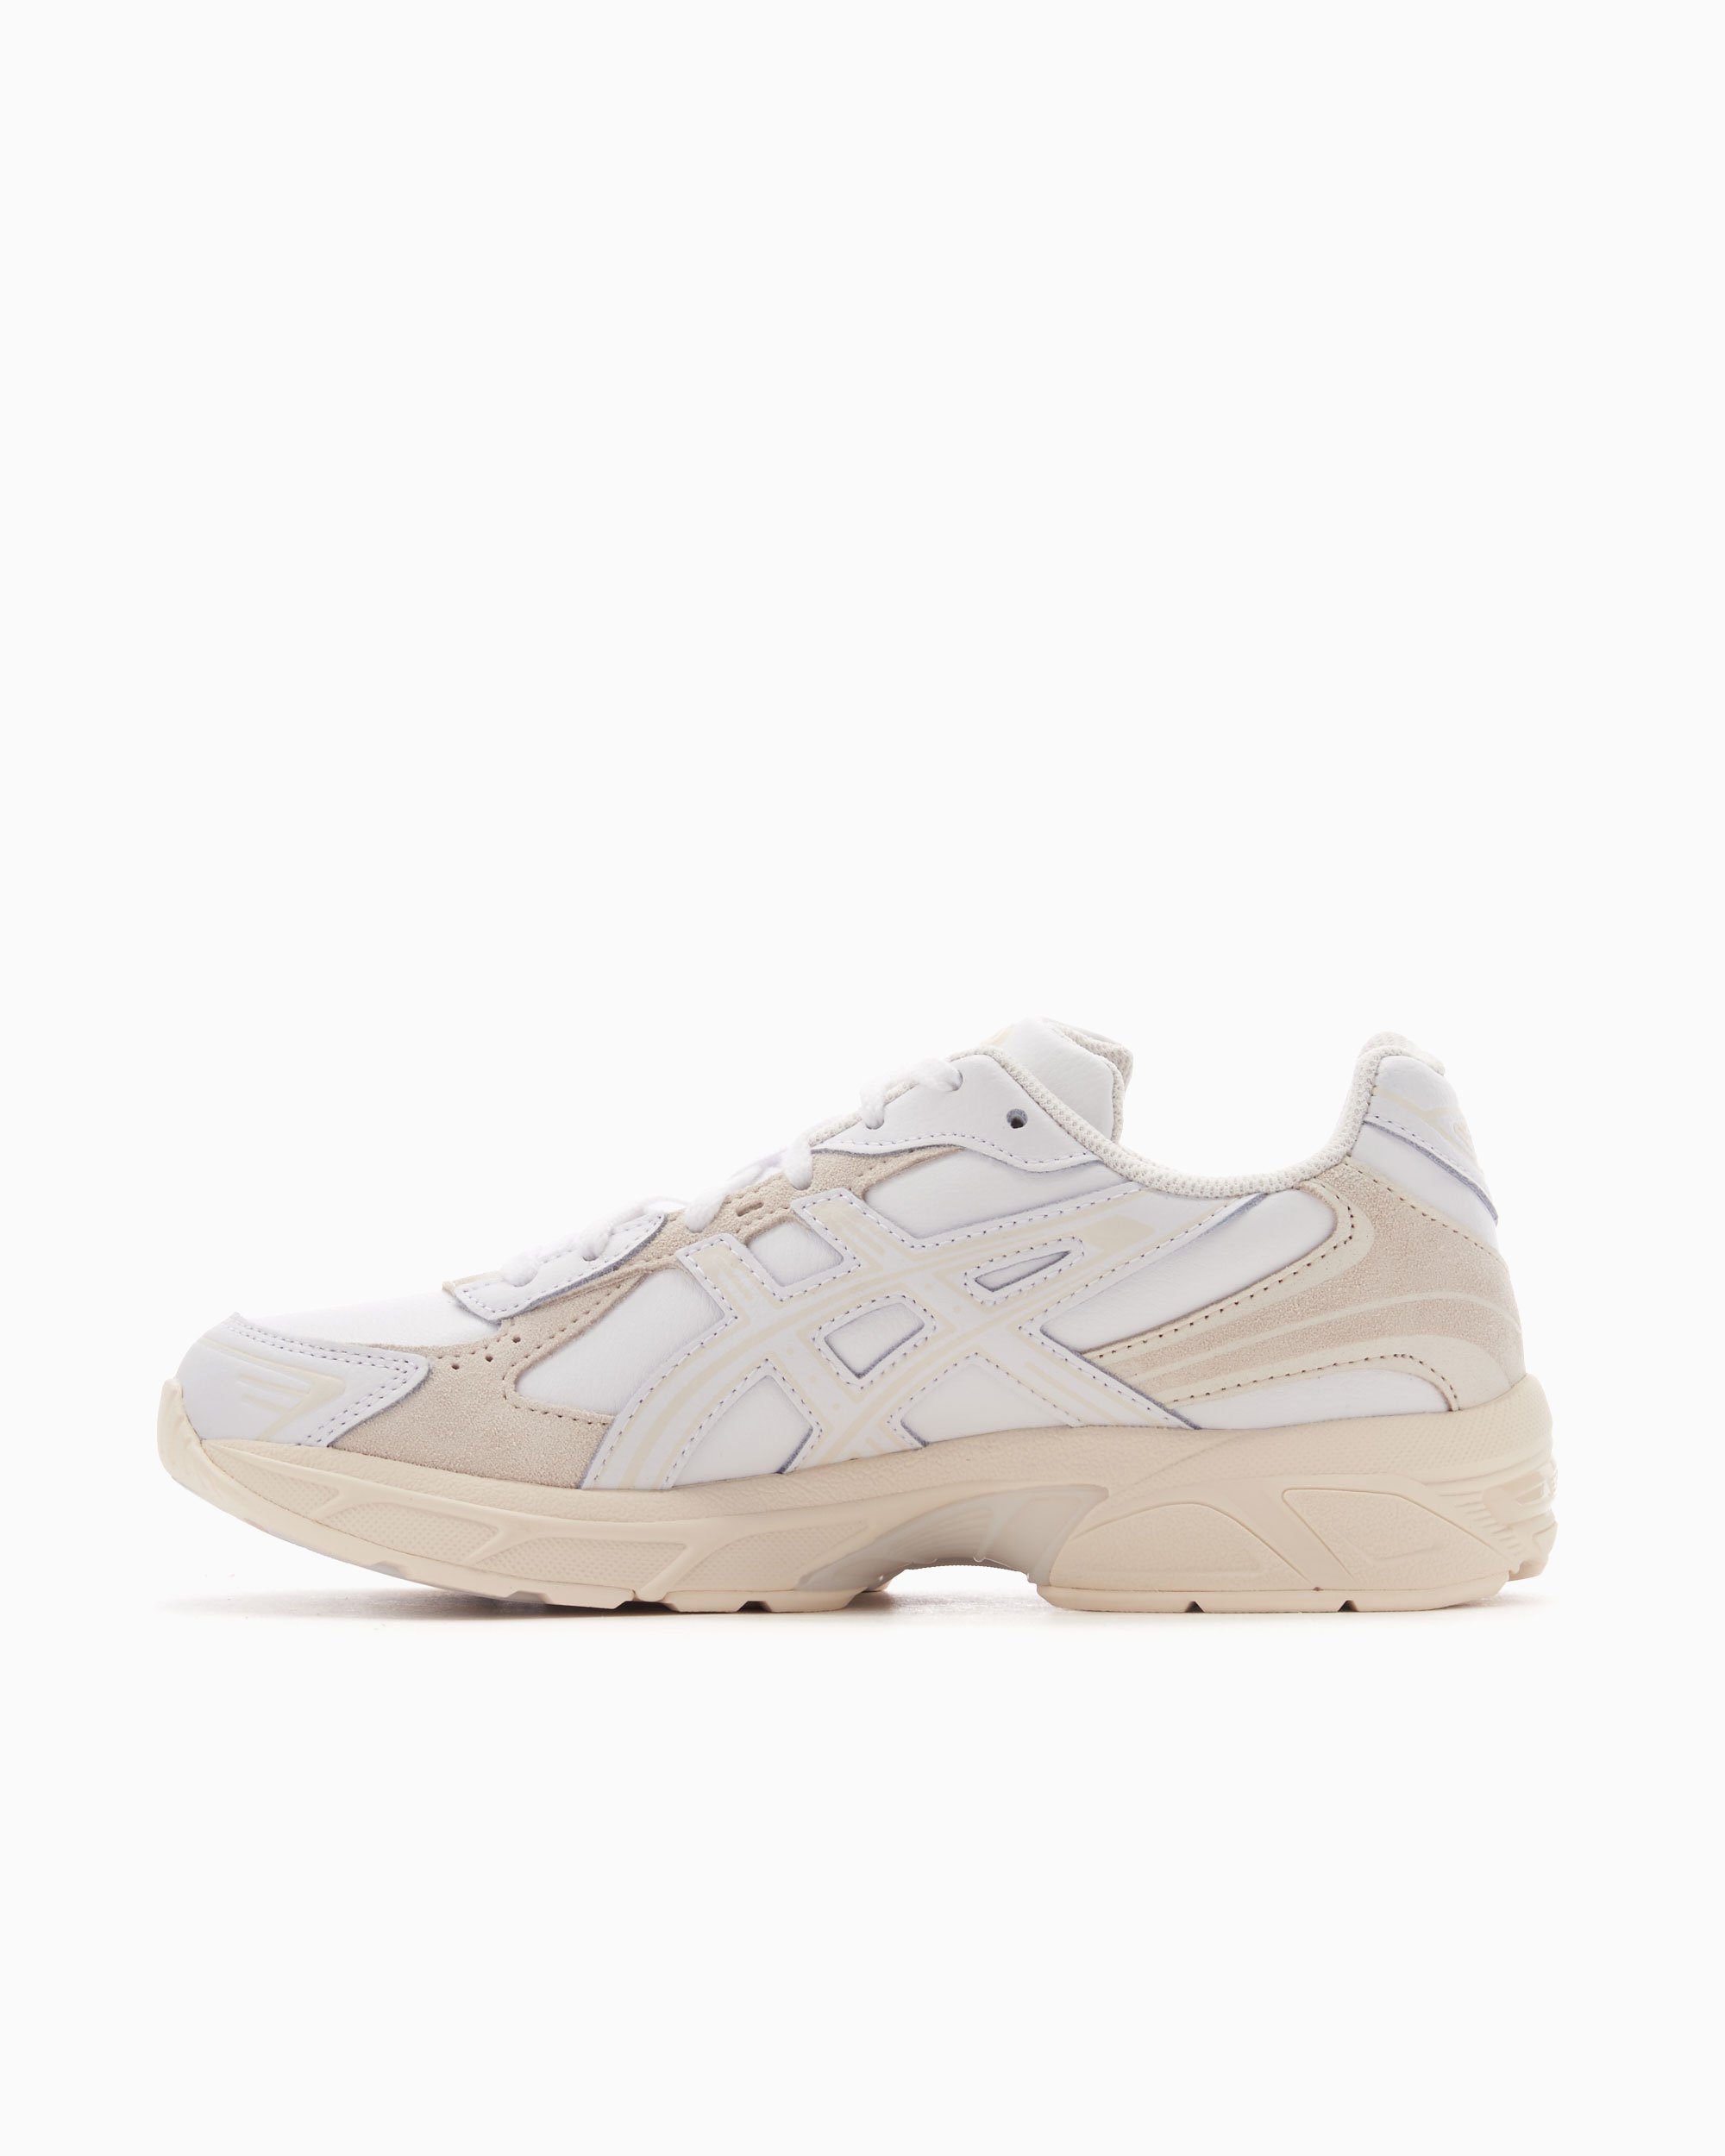 Asics Gel-1130 White 1201A844-100| Buy Online at FOOTDISTRICT